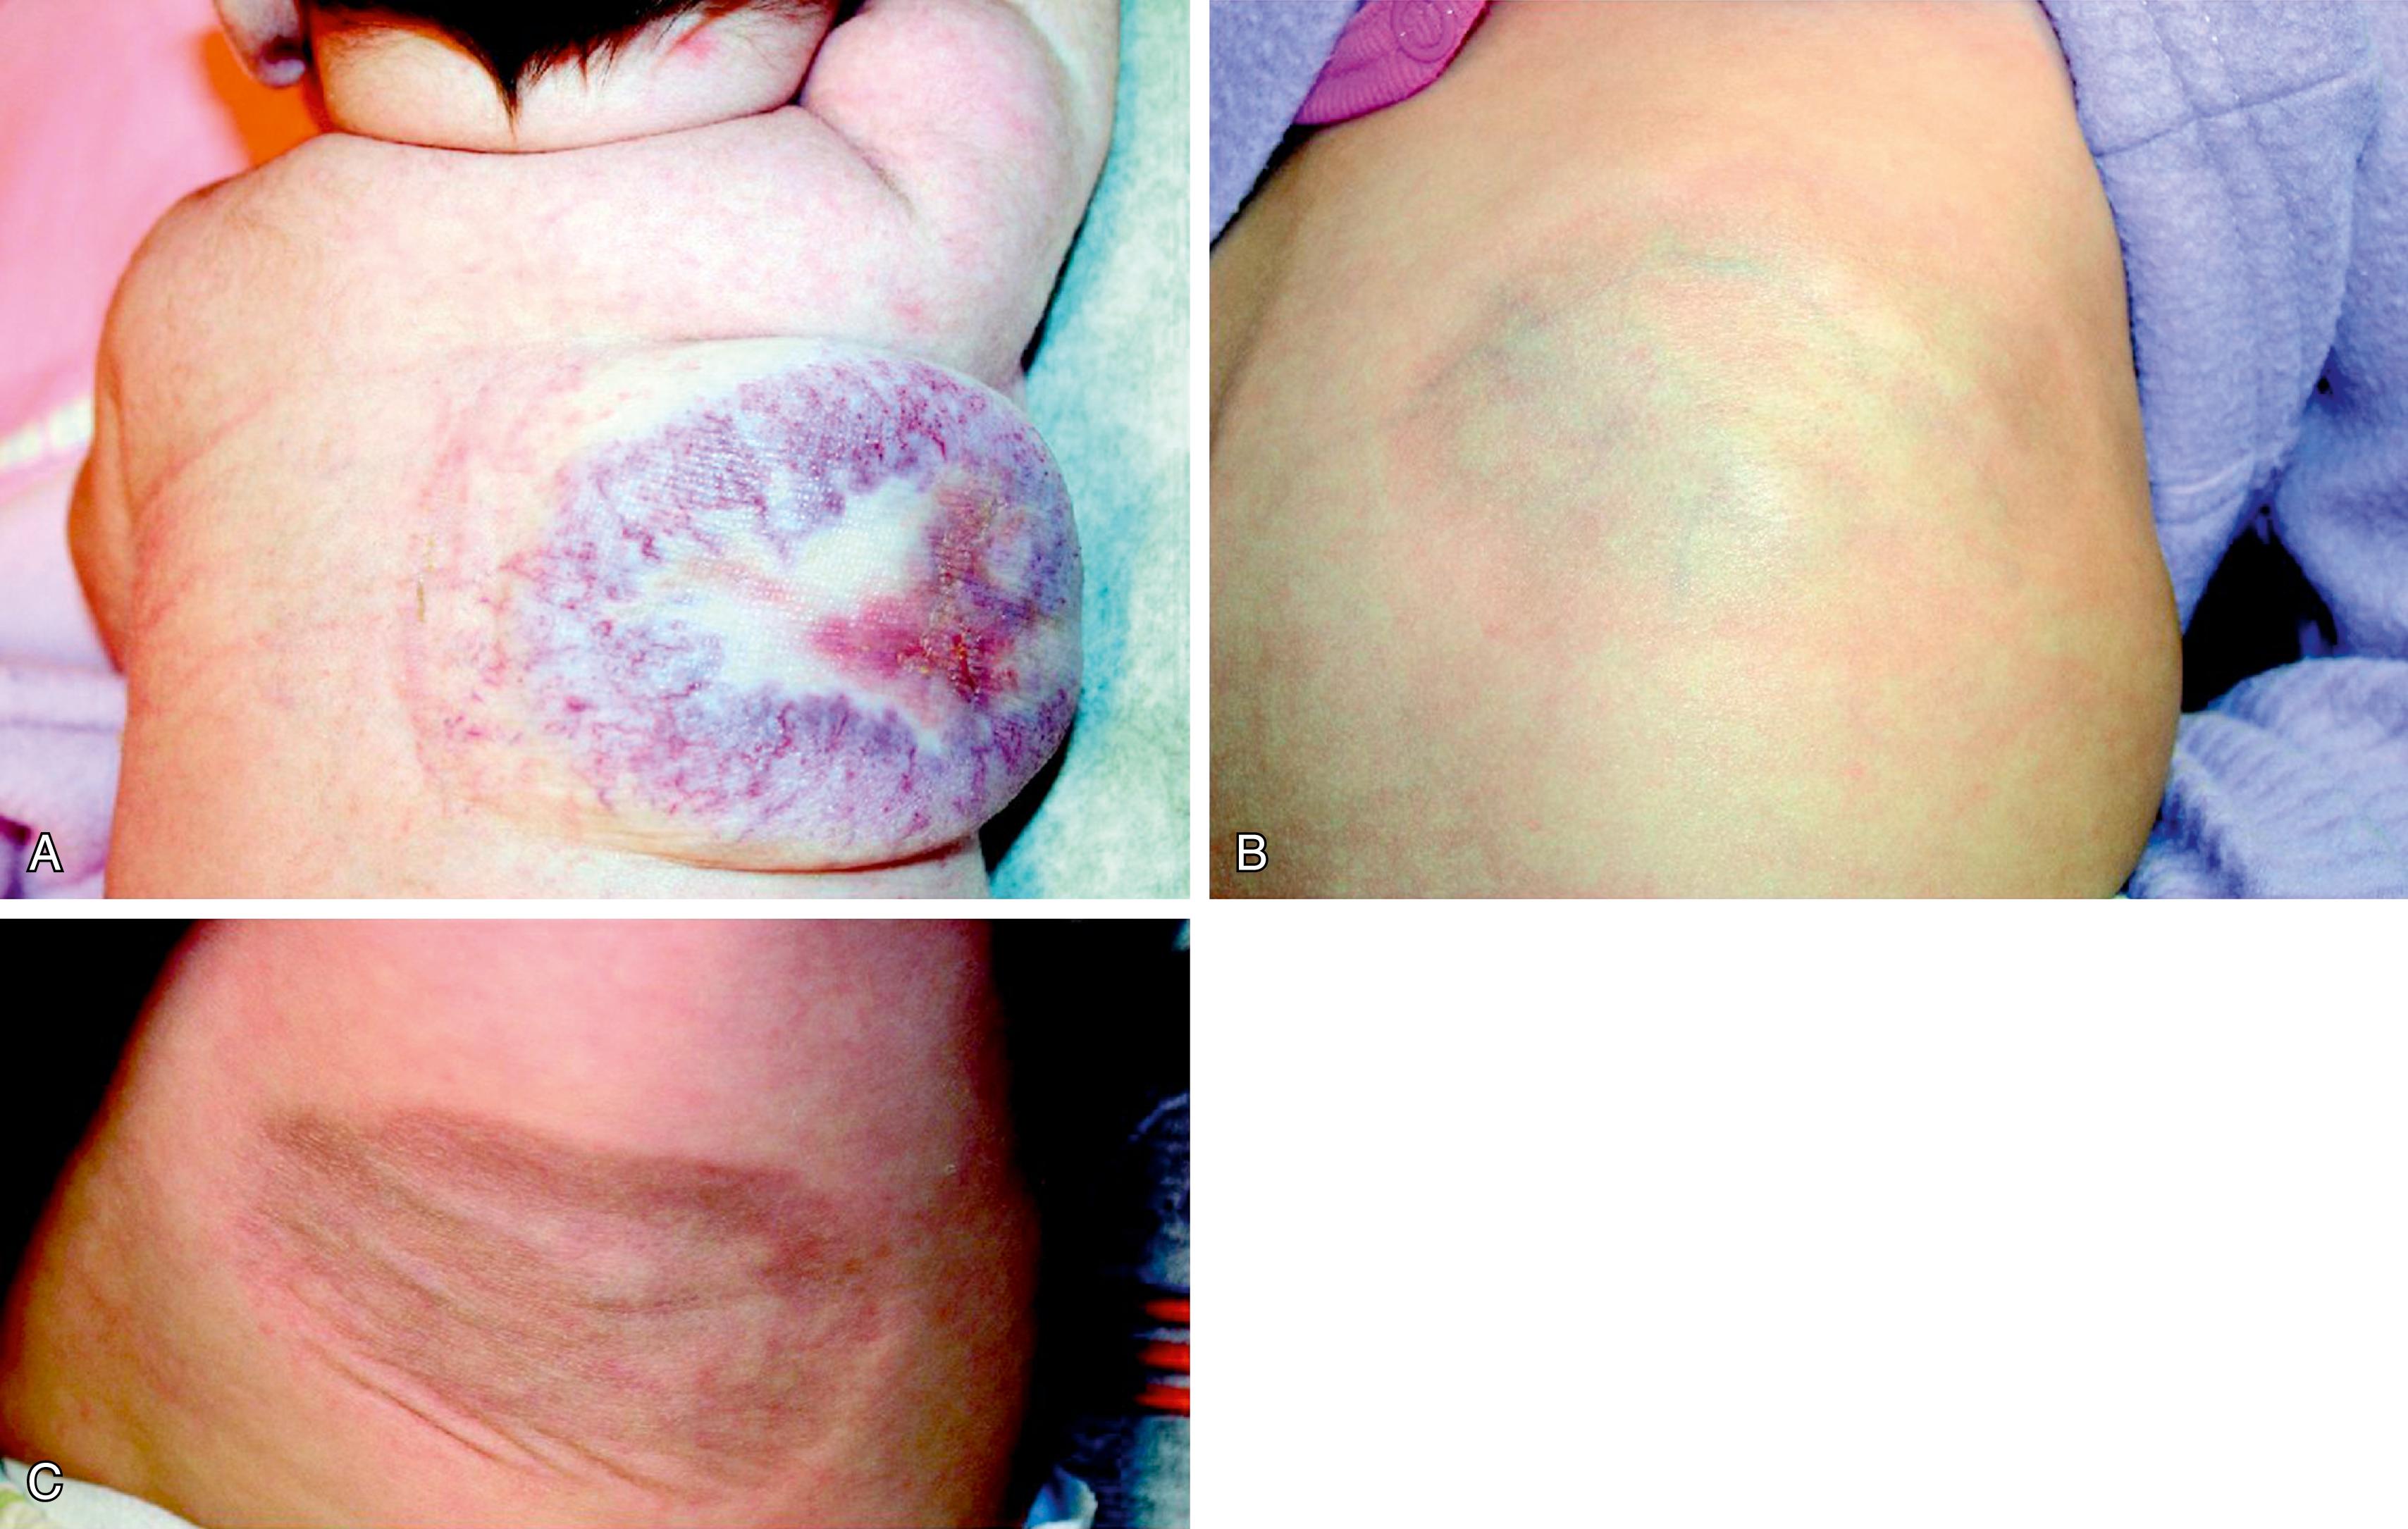 Fig. 10.17, Rapidly involuting congenital hemangioma (RICH) lesion. Also present at birth, these lesions grow no larger but instead involute rapidly and have often resolved by 1 year of age. (A) This infant has a large RICH lesion on his back, which is in the process of involution. Following involution these lesions leave behind an atrophic plaque. (B) In this child, evidence of mild residual atrophy is seen. (C) Another child was left with marked subcutaneous atrophy at the site.